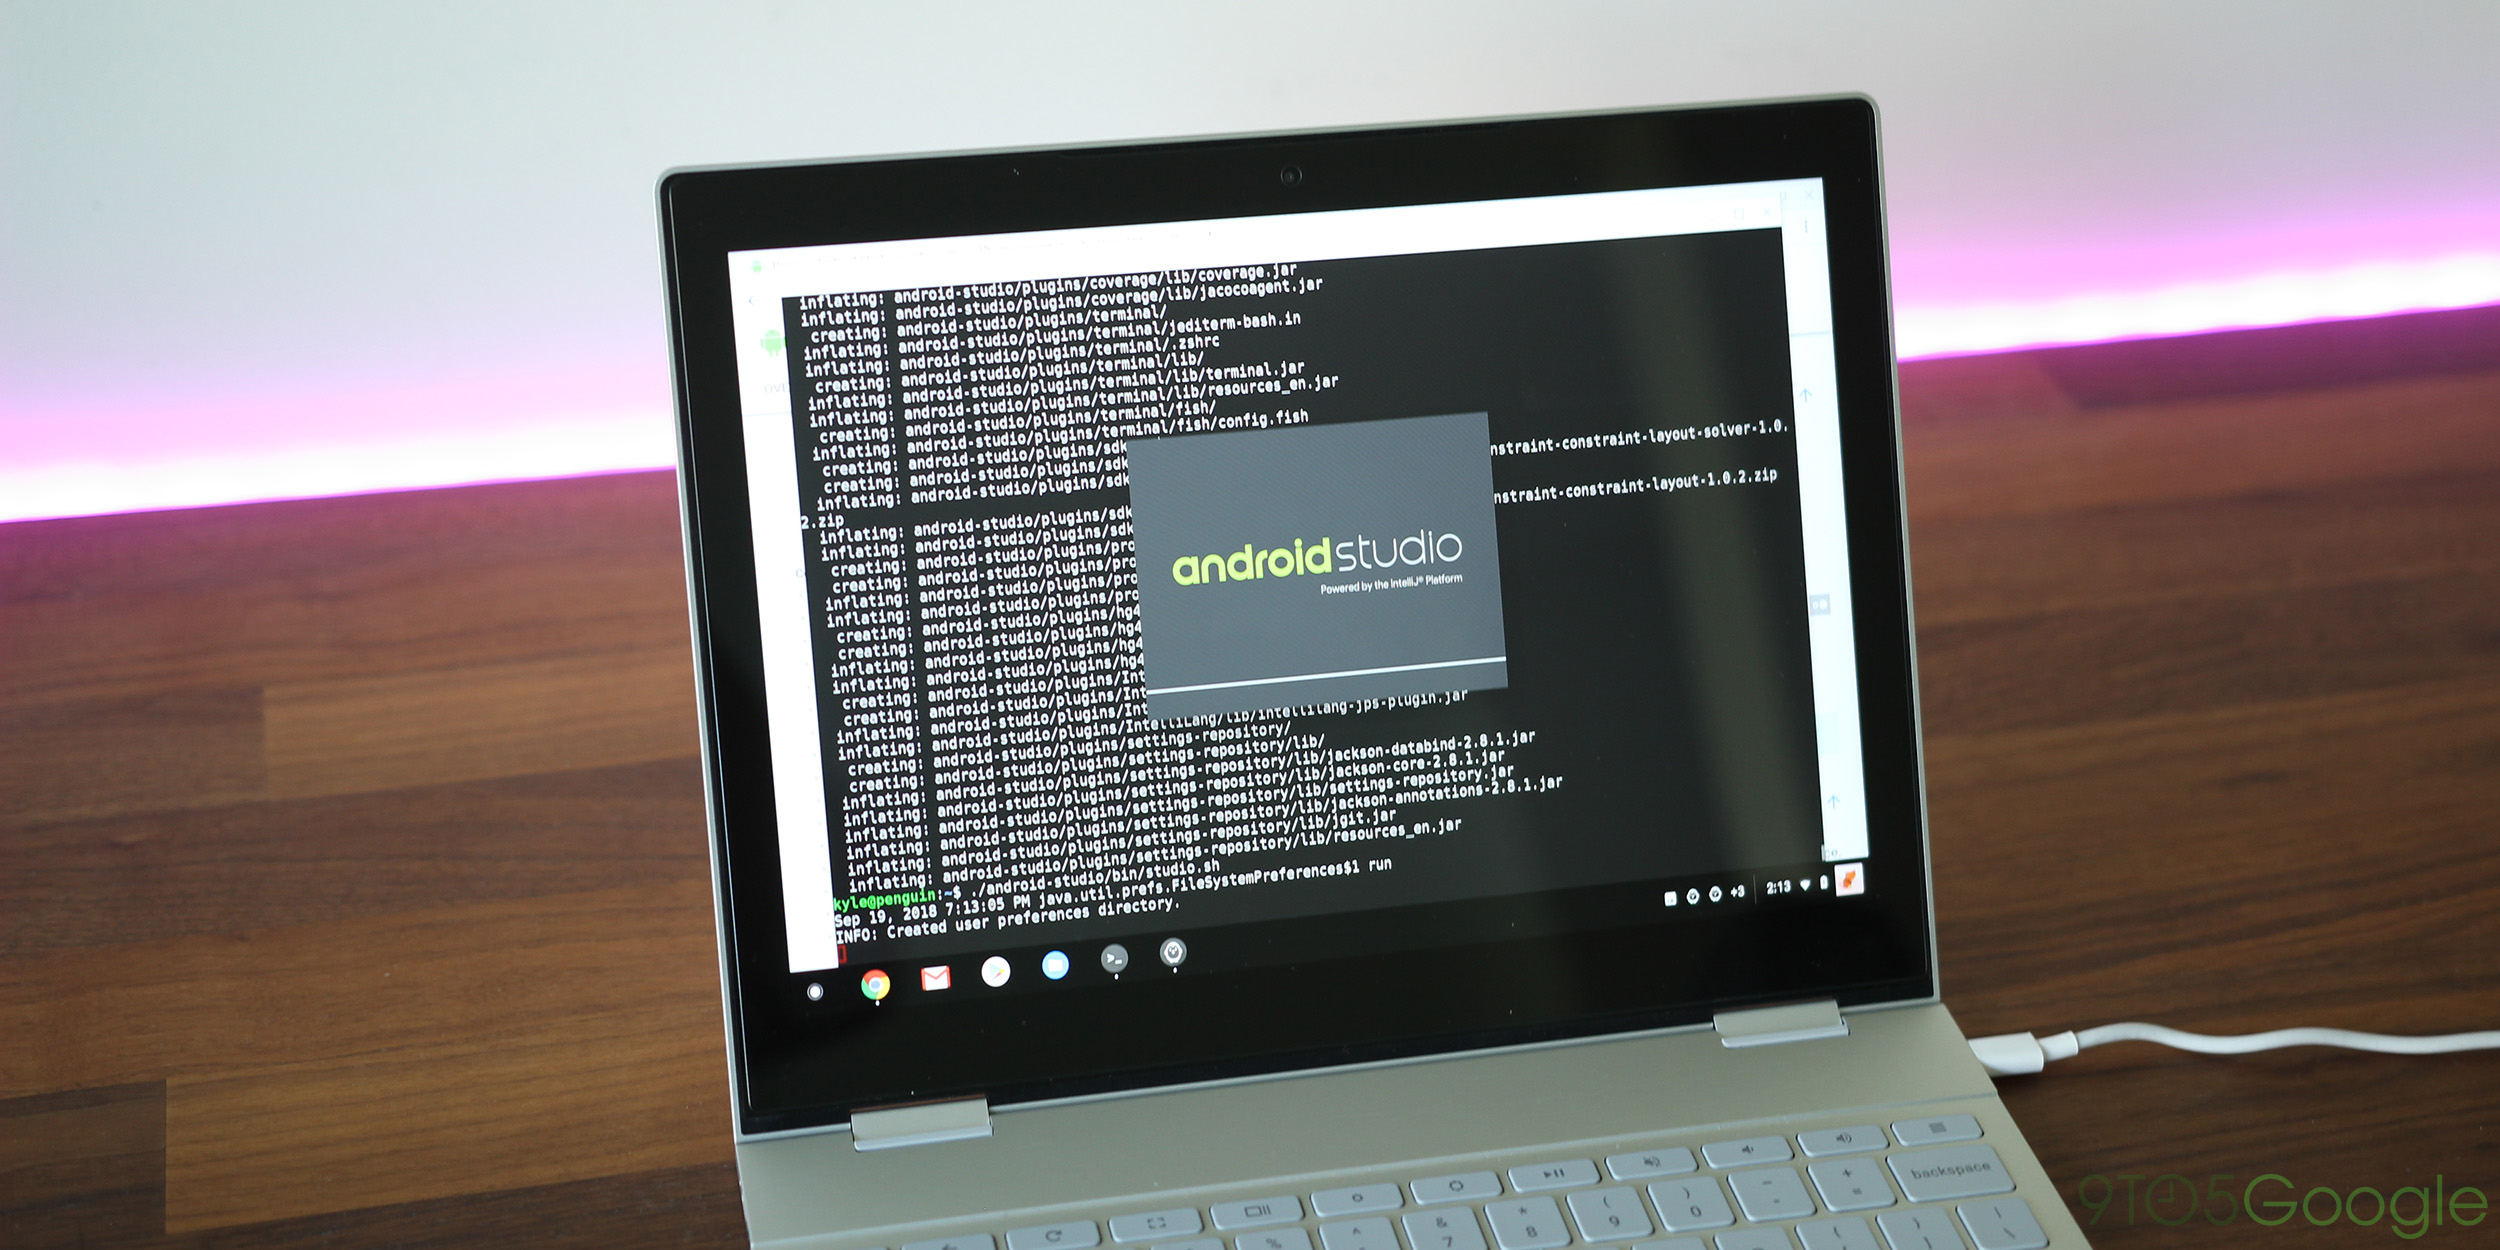 How to install Android Studio on Chrome OS